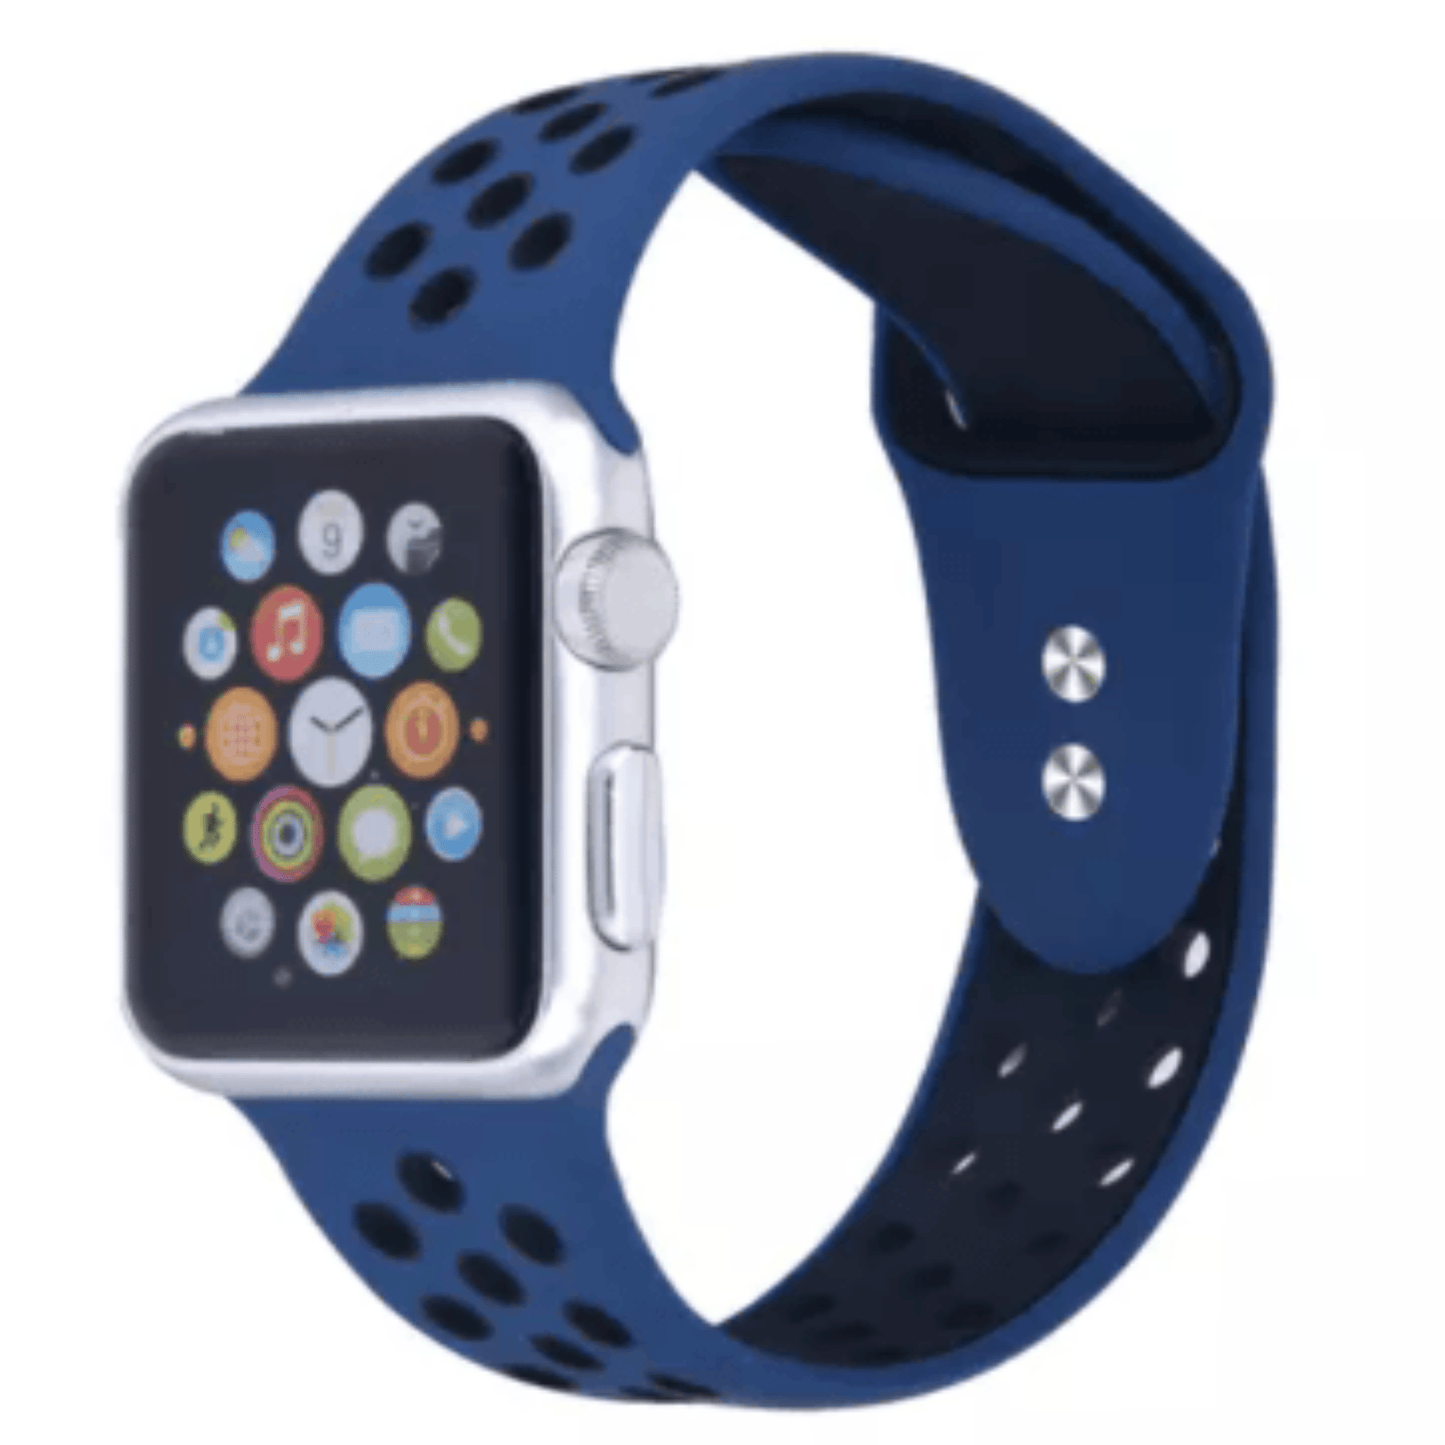 Breathable Silicone Sport Replacement Band for Apple Watch Navy Black Apple Watch Band Elements Watches